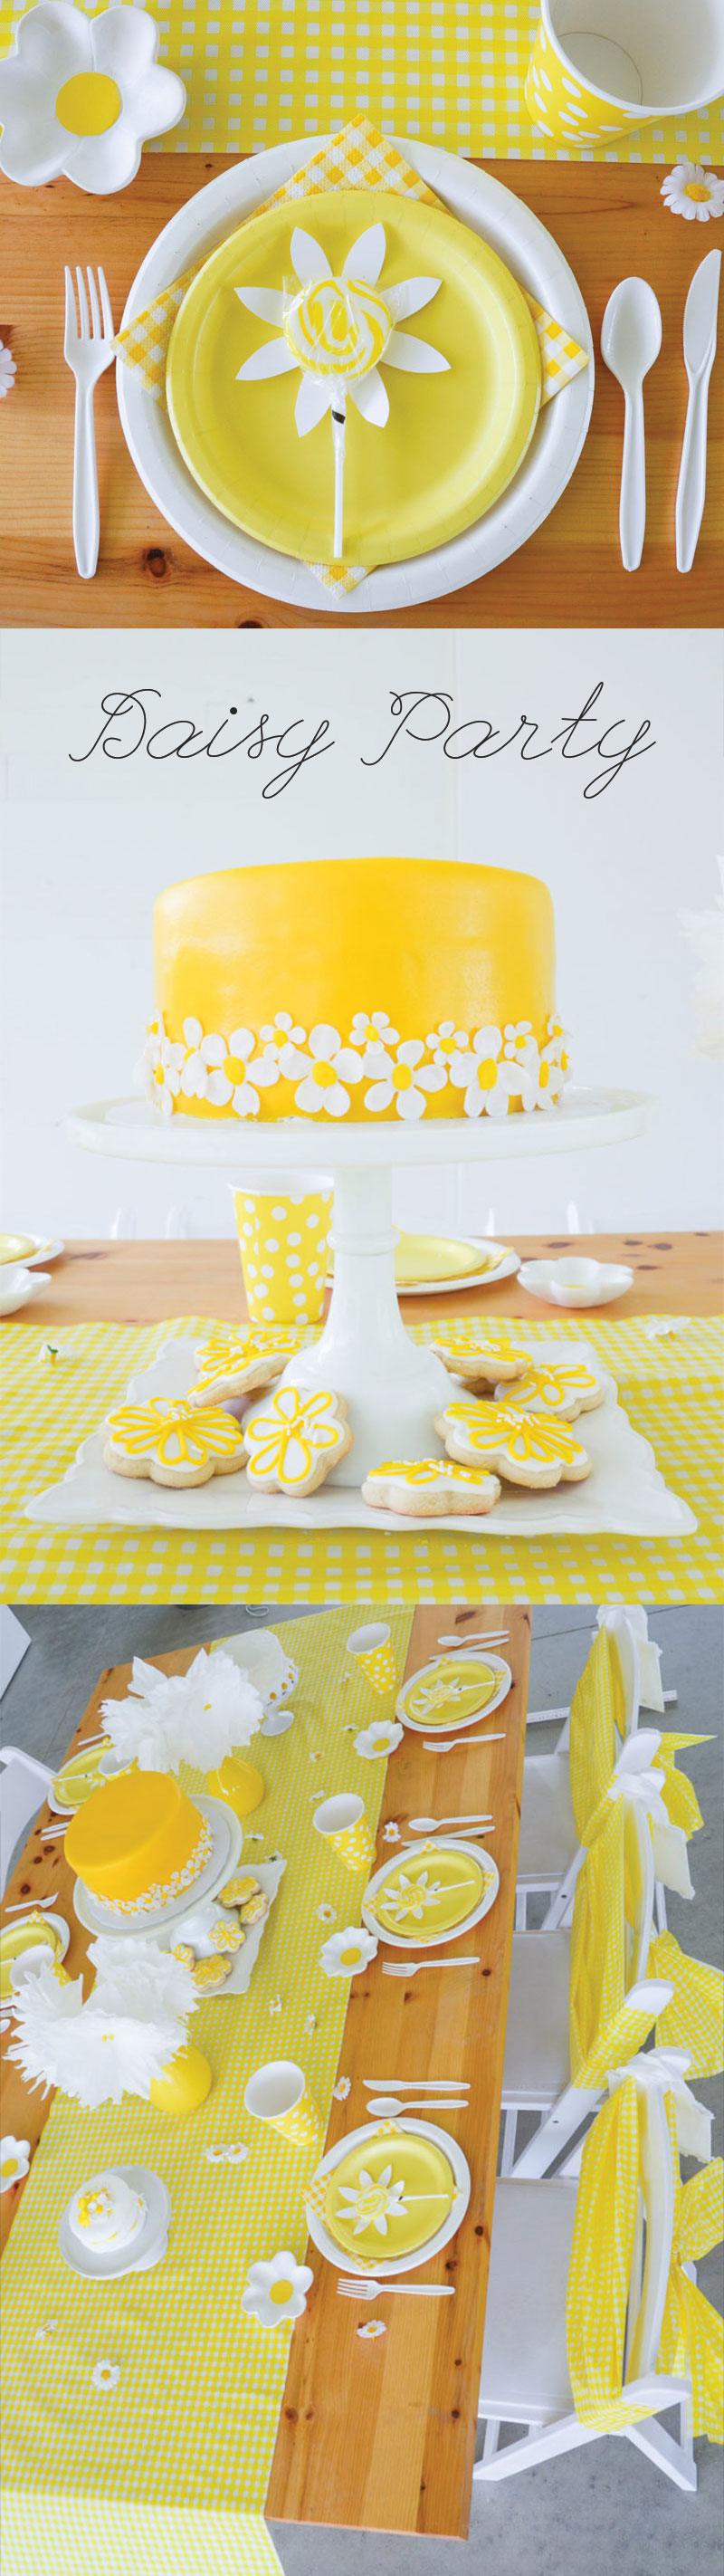 Daisy Party Ideas by Lindi Haws of Love The Day